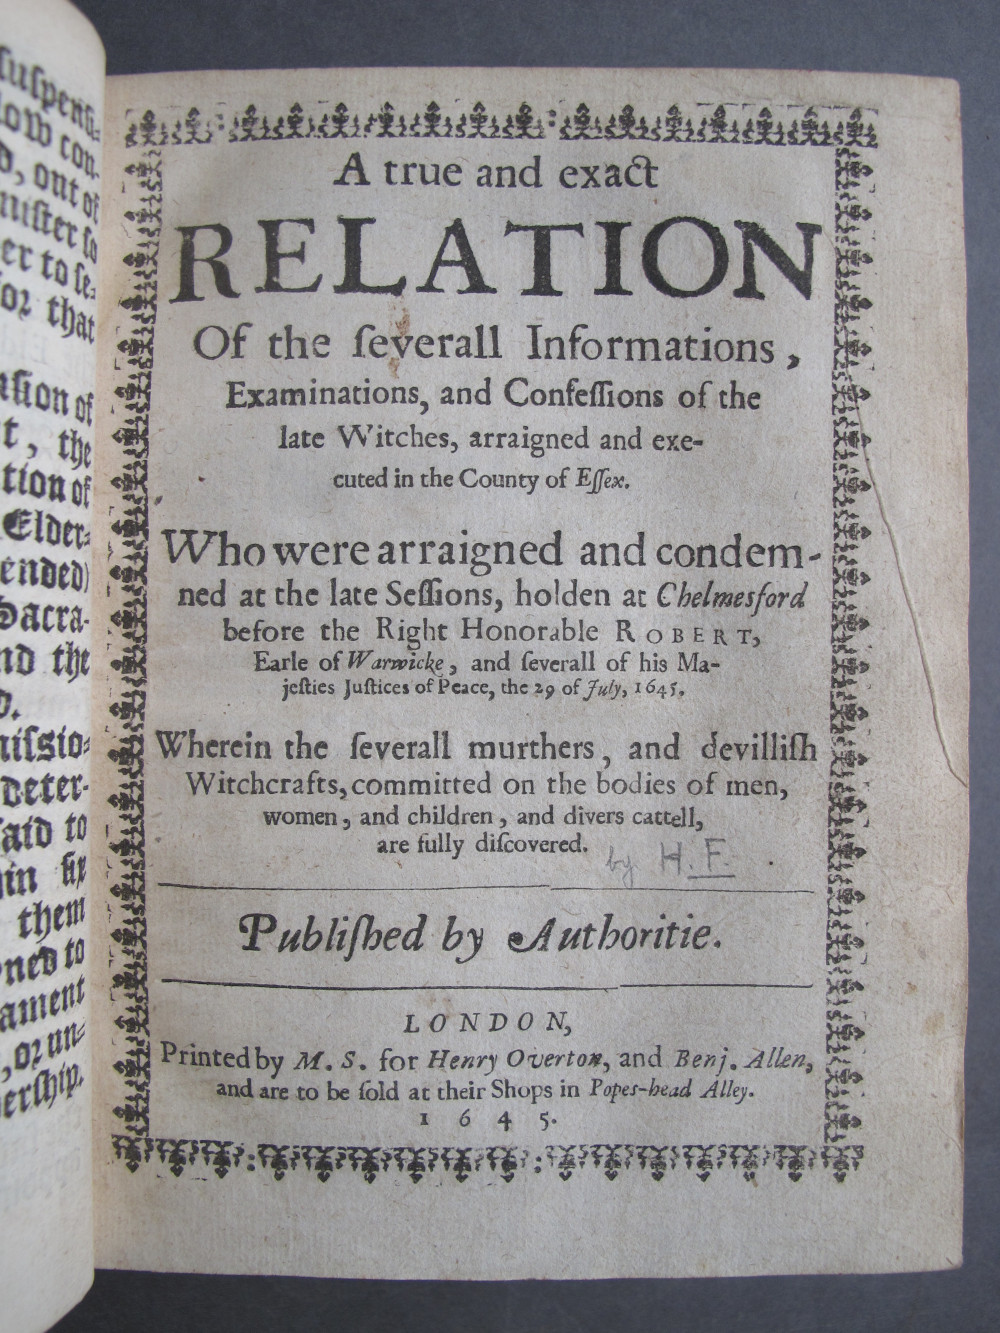 title page of A True and Exact Relation of the Severall Informations, Examinations, and Confessions of the Late Witches